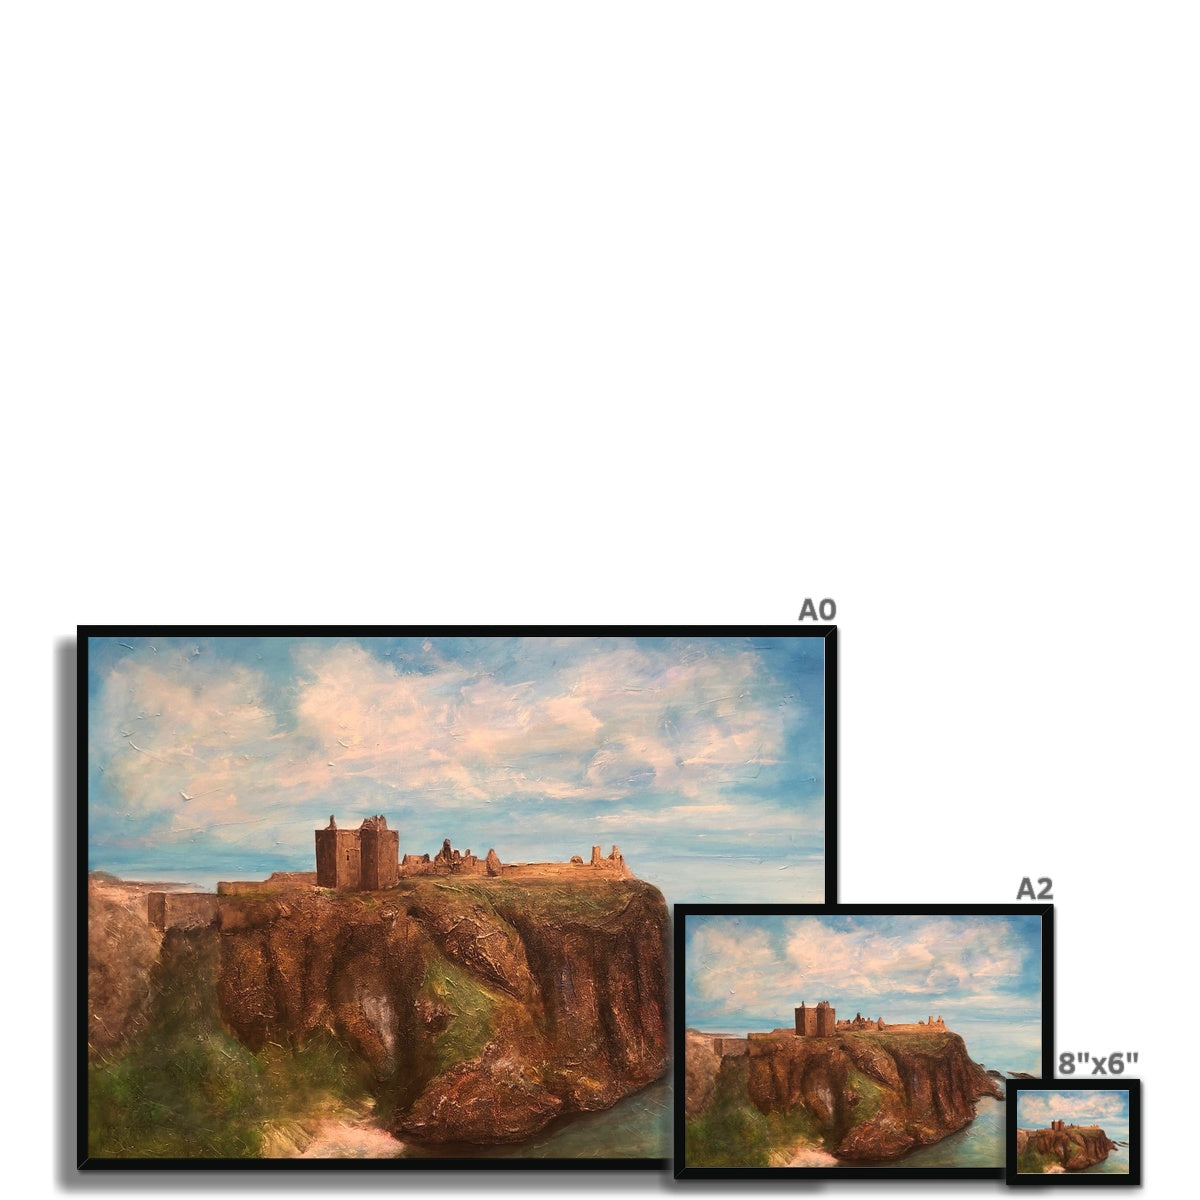 Dunnottar Castle Painting | Framed Prints From Scotland-Framed Prints-Historic & Iconic Scotland Art Gallery-Paintings, Prints, Homeware, Art Gifts From Scotland By Scottish Artist Kevin Hunter